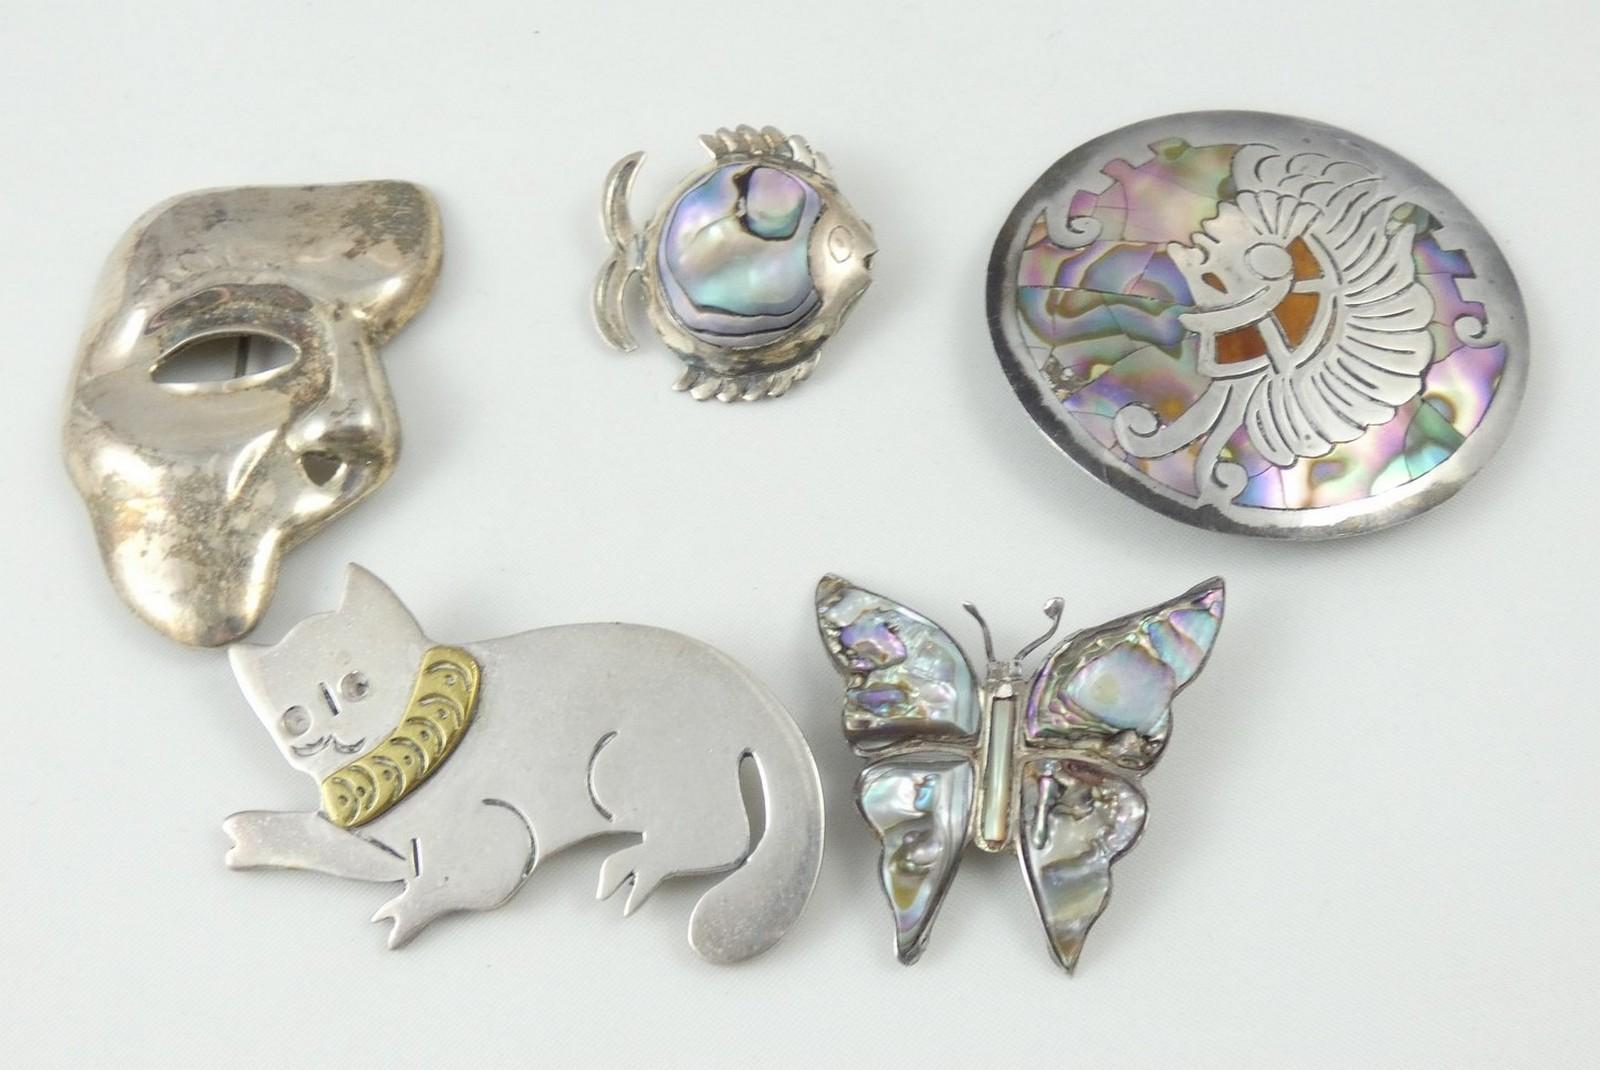 5 STERLING SILVER BROOCHES